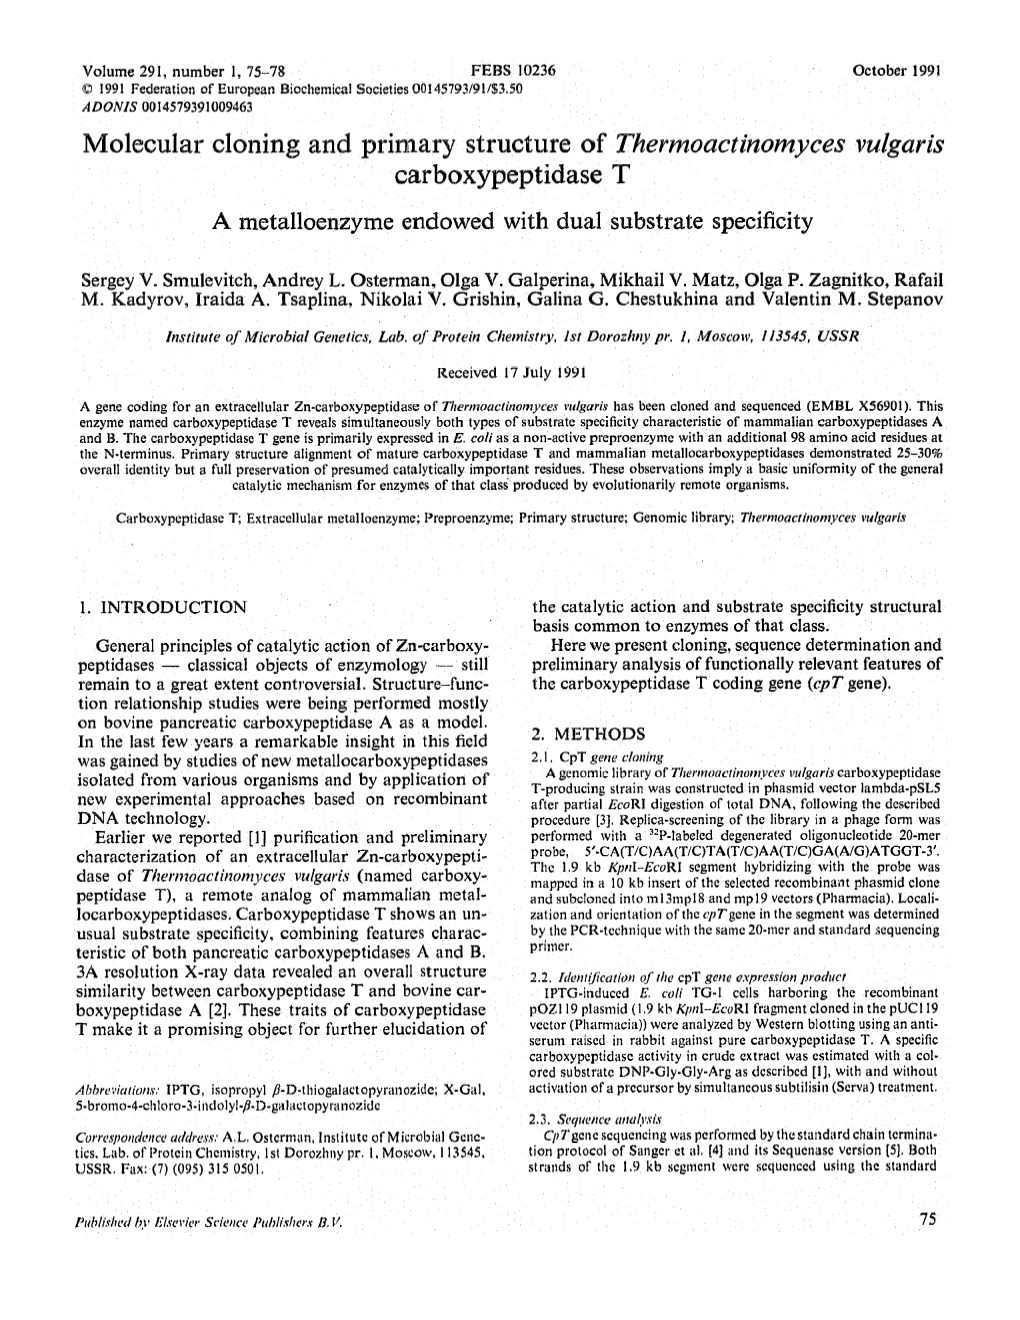 Molecular Cloning and Primary Structure of Thermoactinomyces